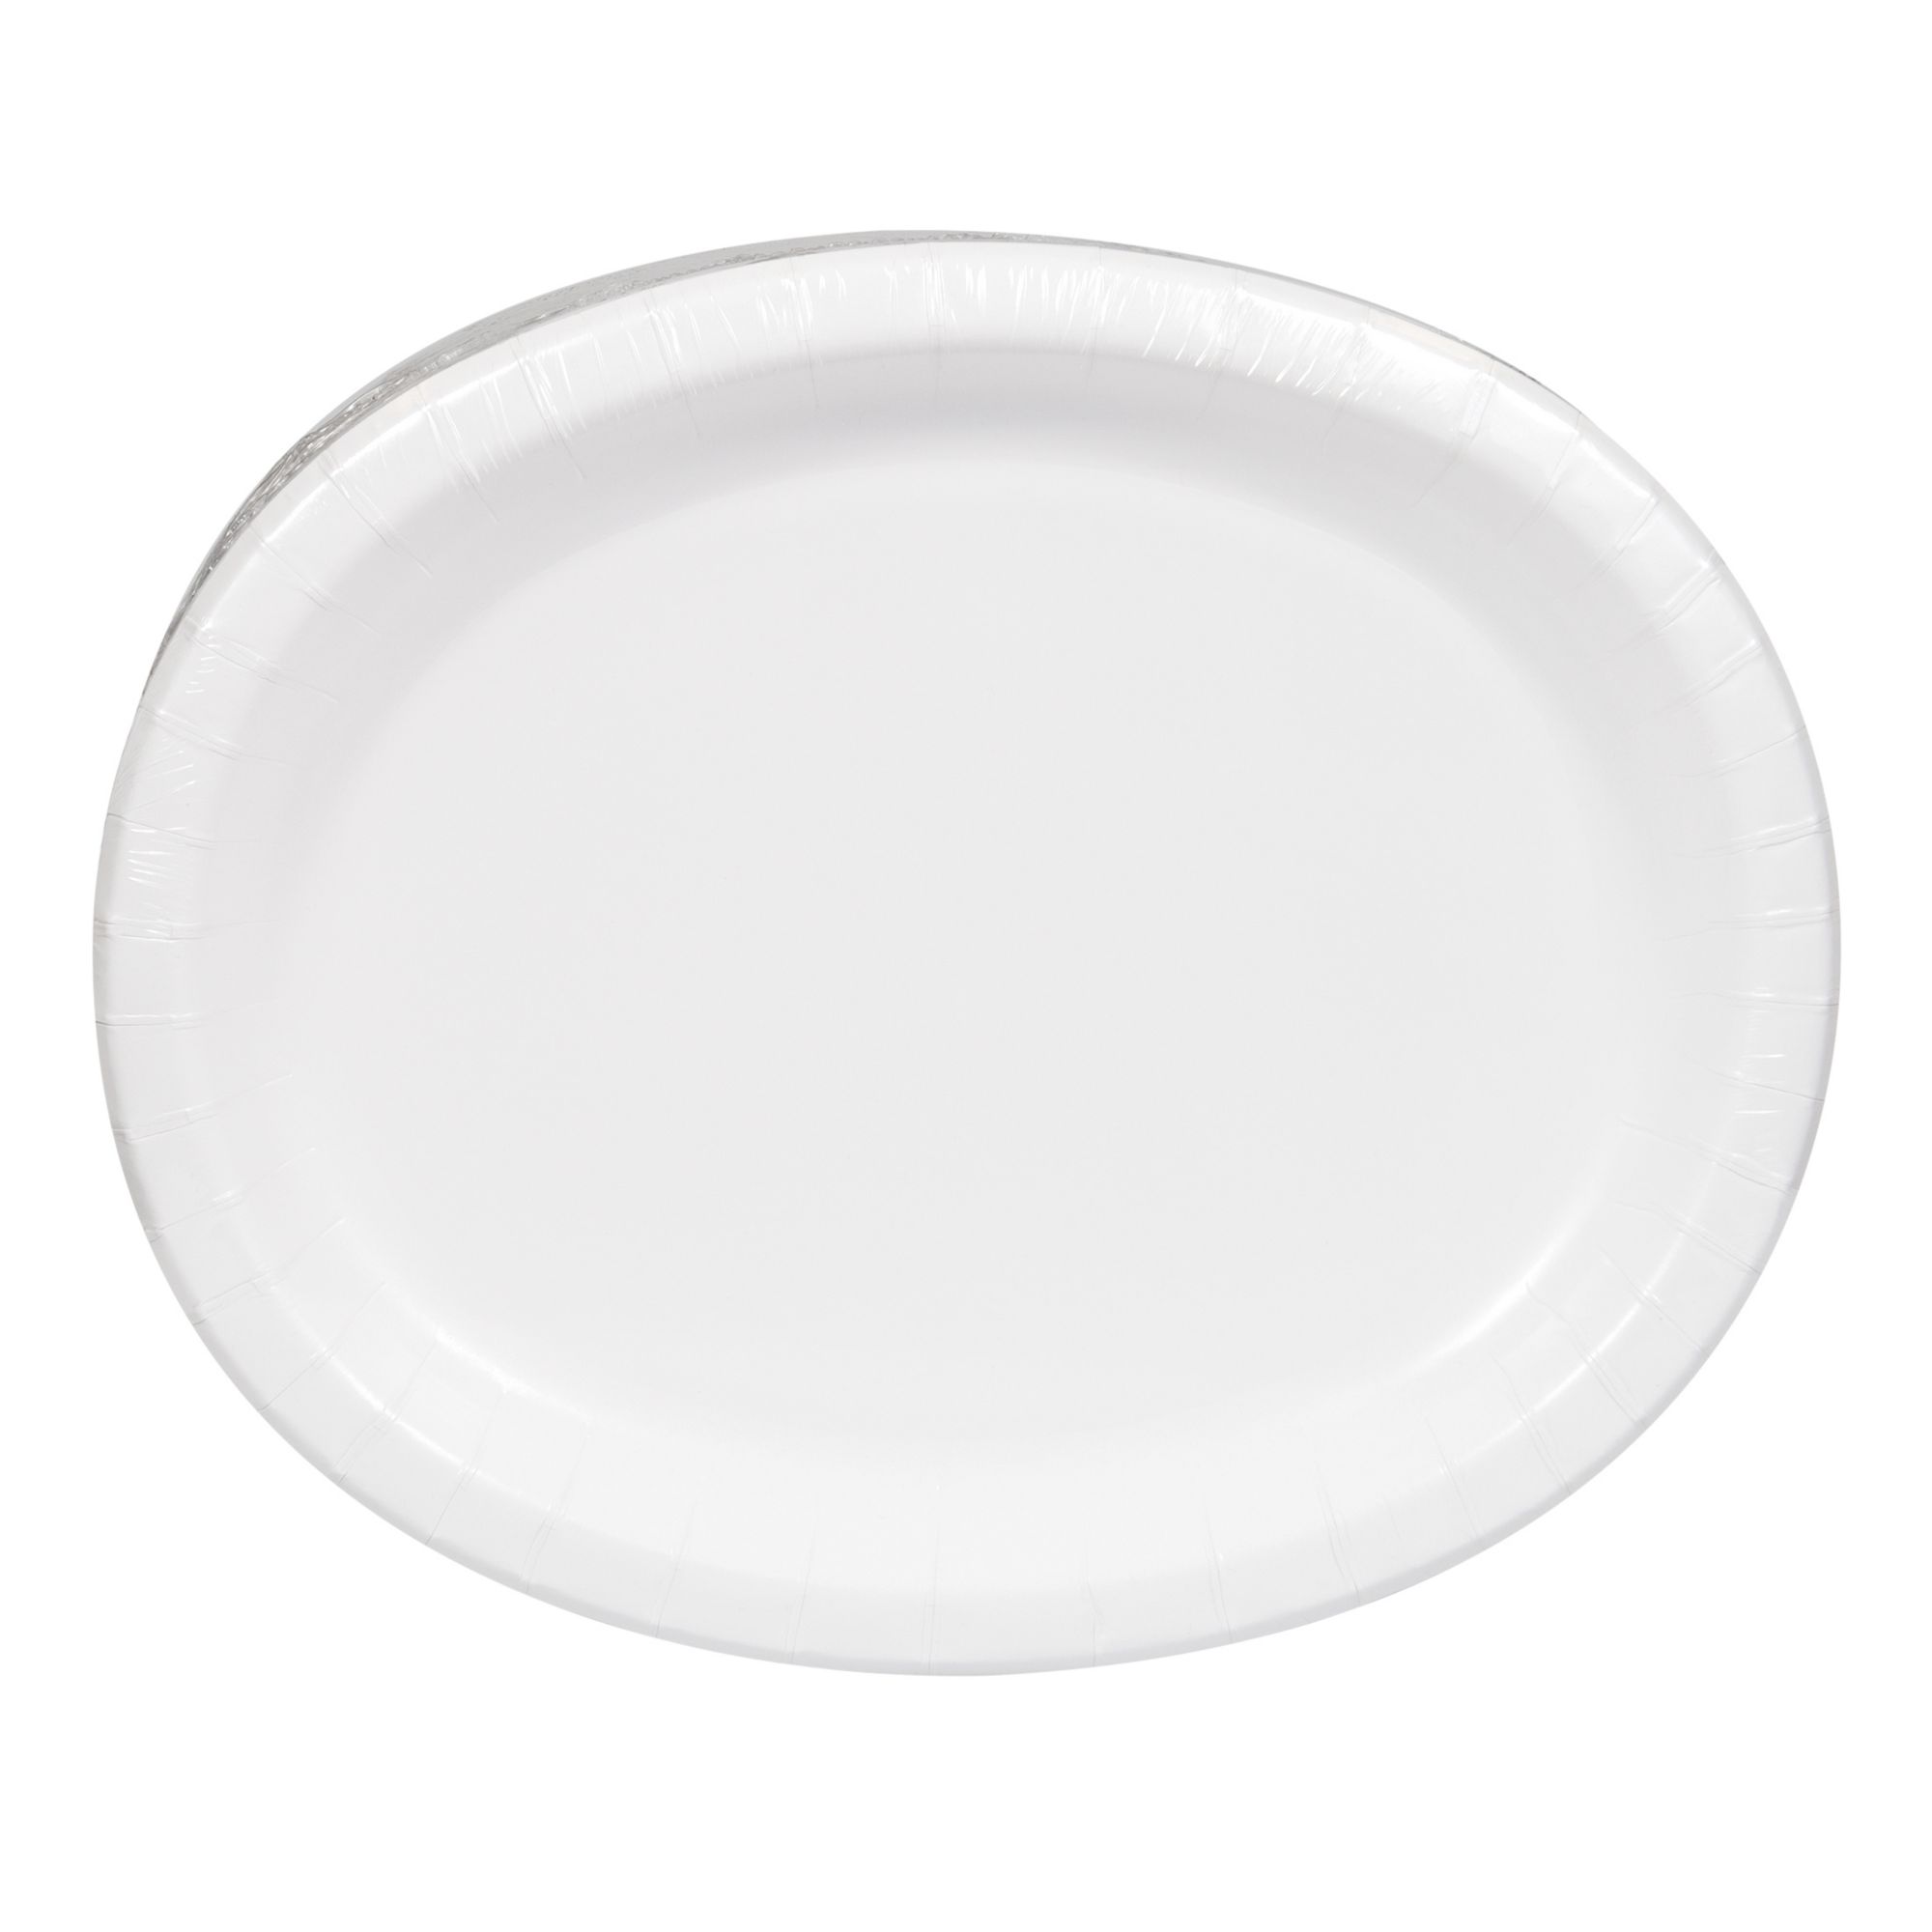 Chinet 6.5 Classic White Appetizer and Dessert Plates, 300 ct.